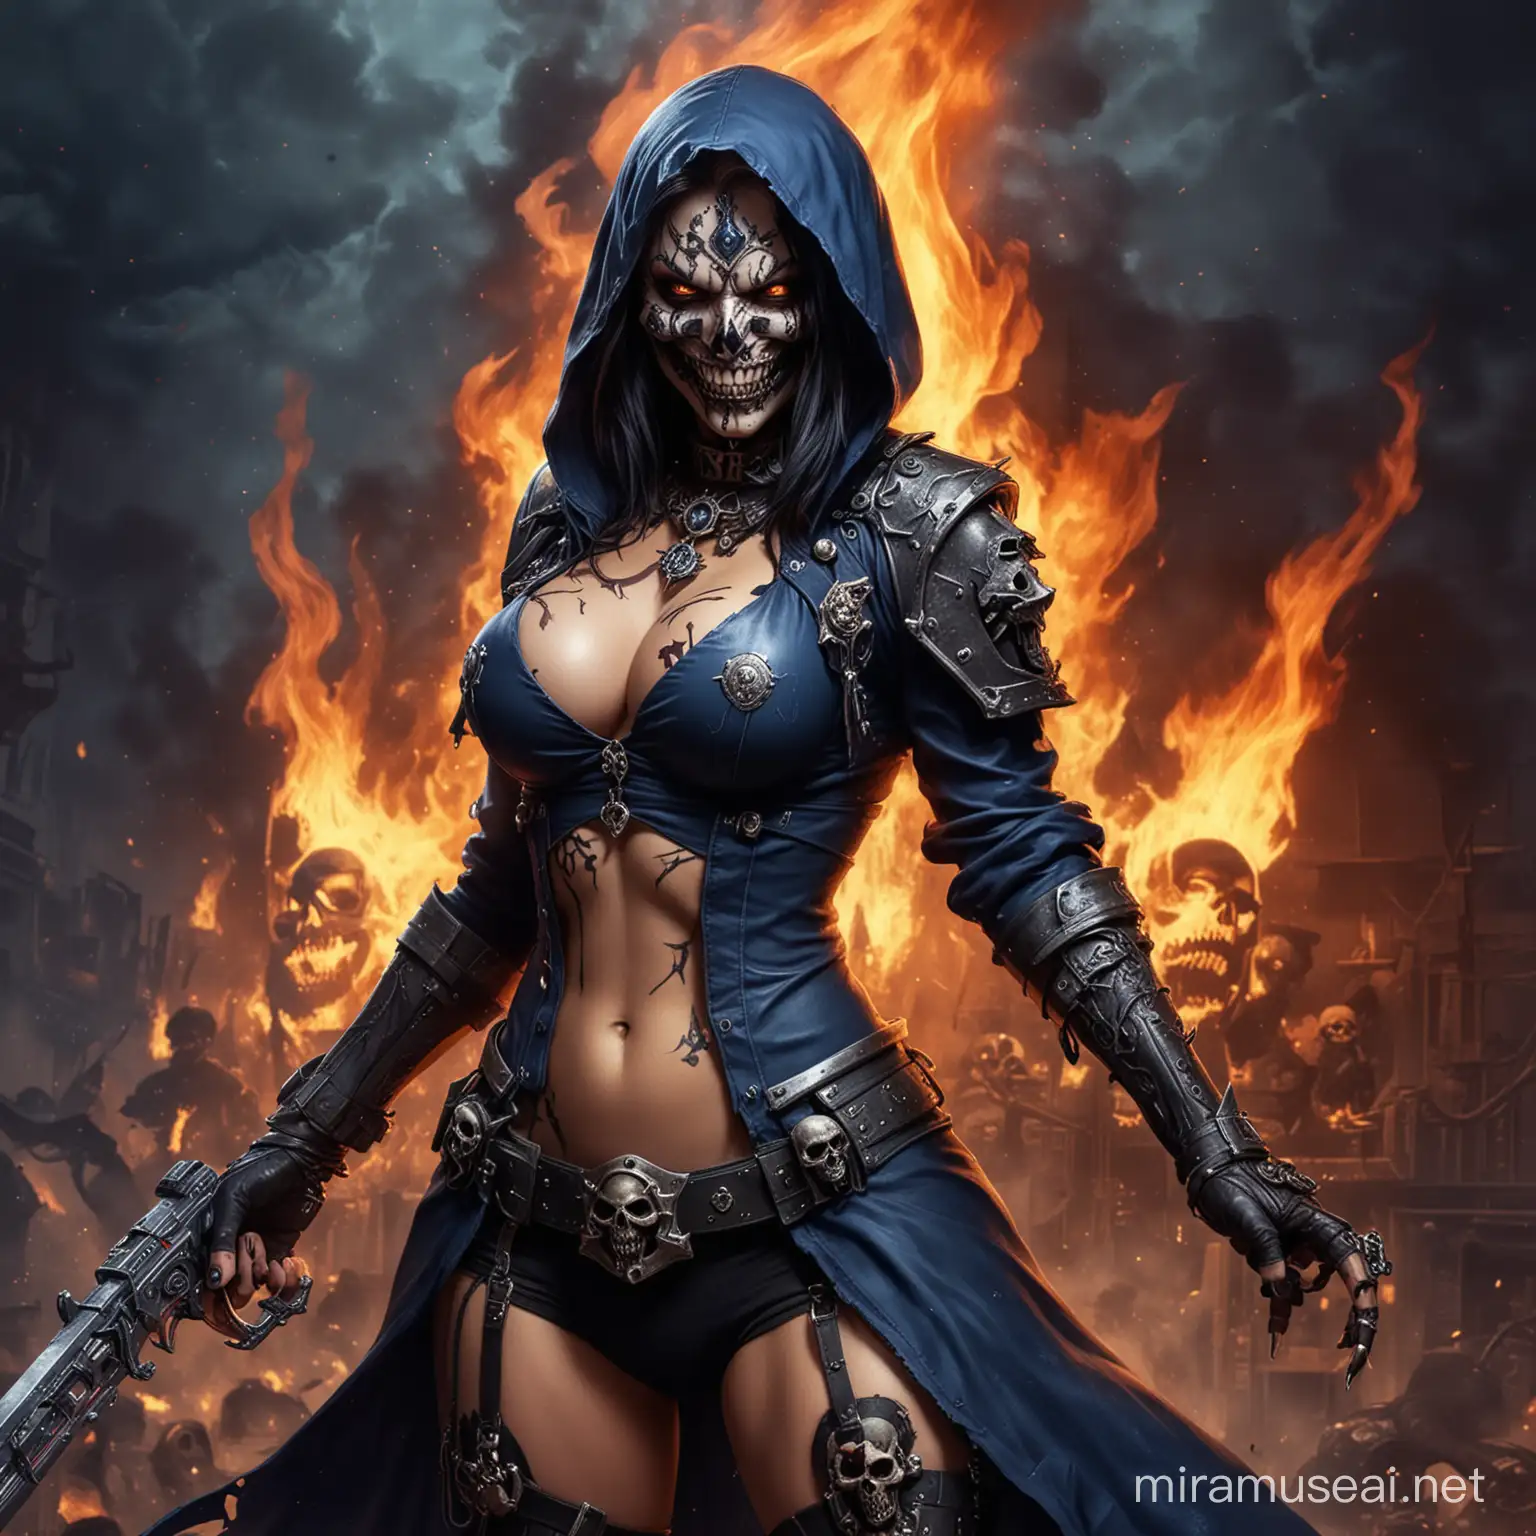 Sexy Female Warhammer 40k Cultist Leader with Burning Chaos Tattoo